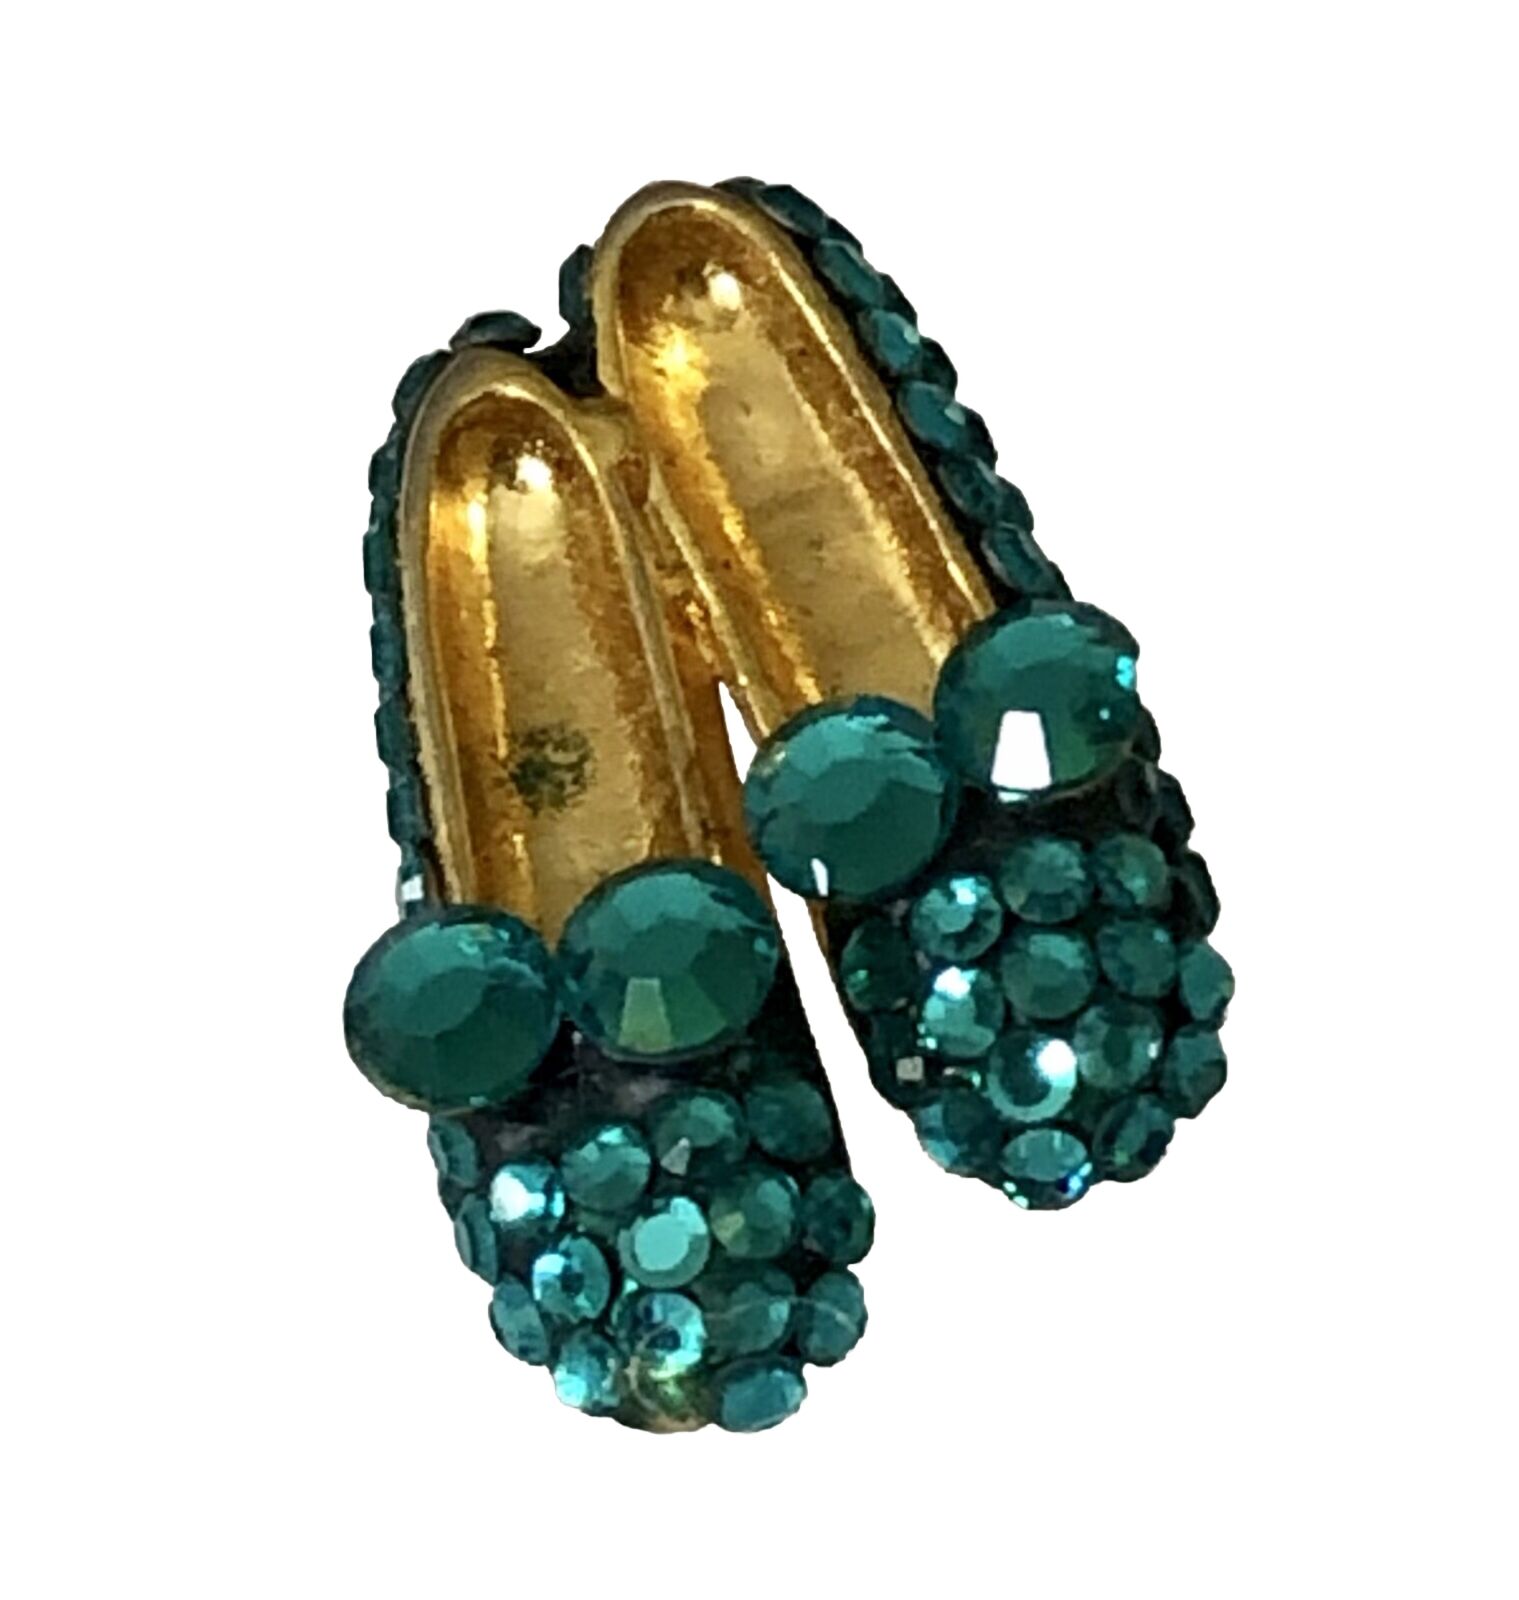 Vintage Green Oz Shoes Lapel Pin Crystals Teal Rhinestone Slippers Brooch